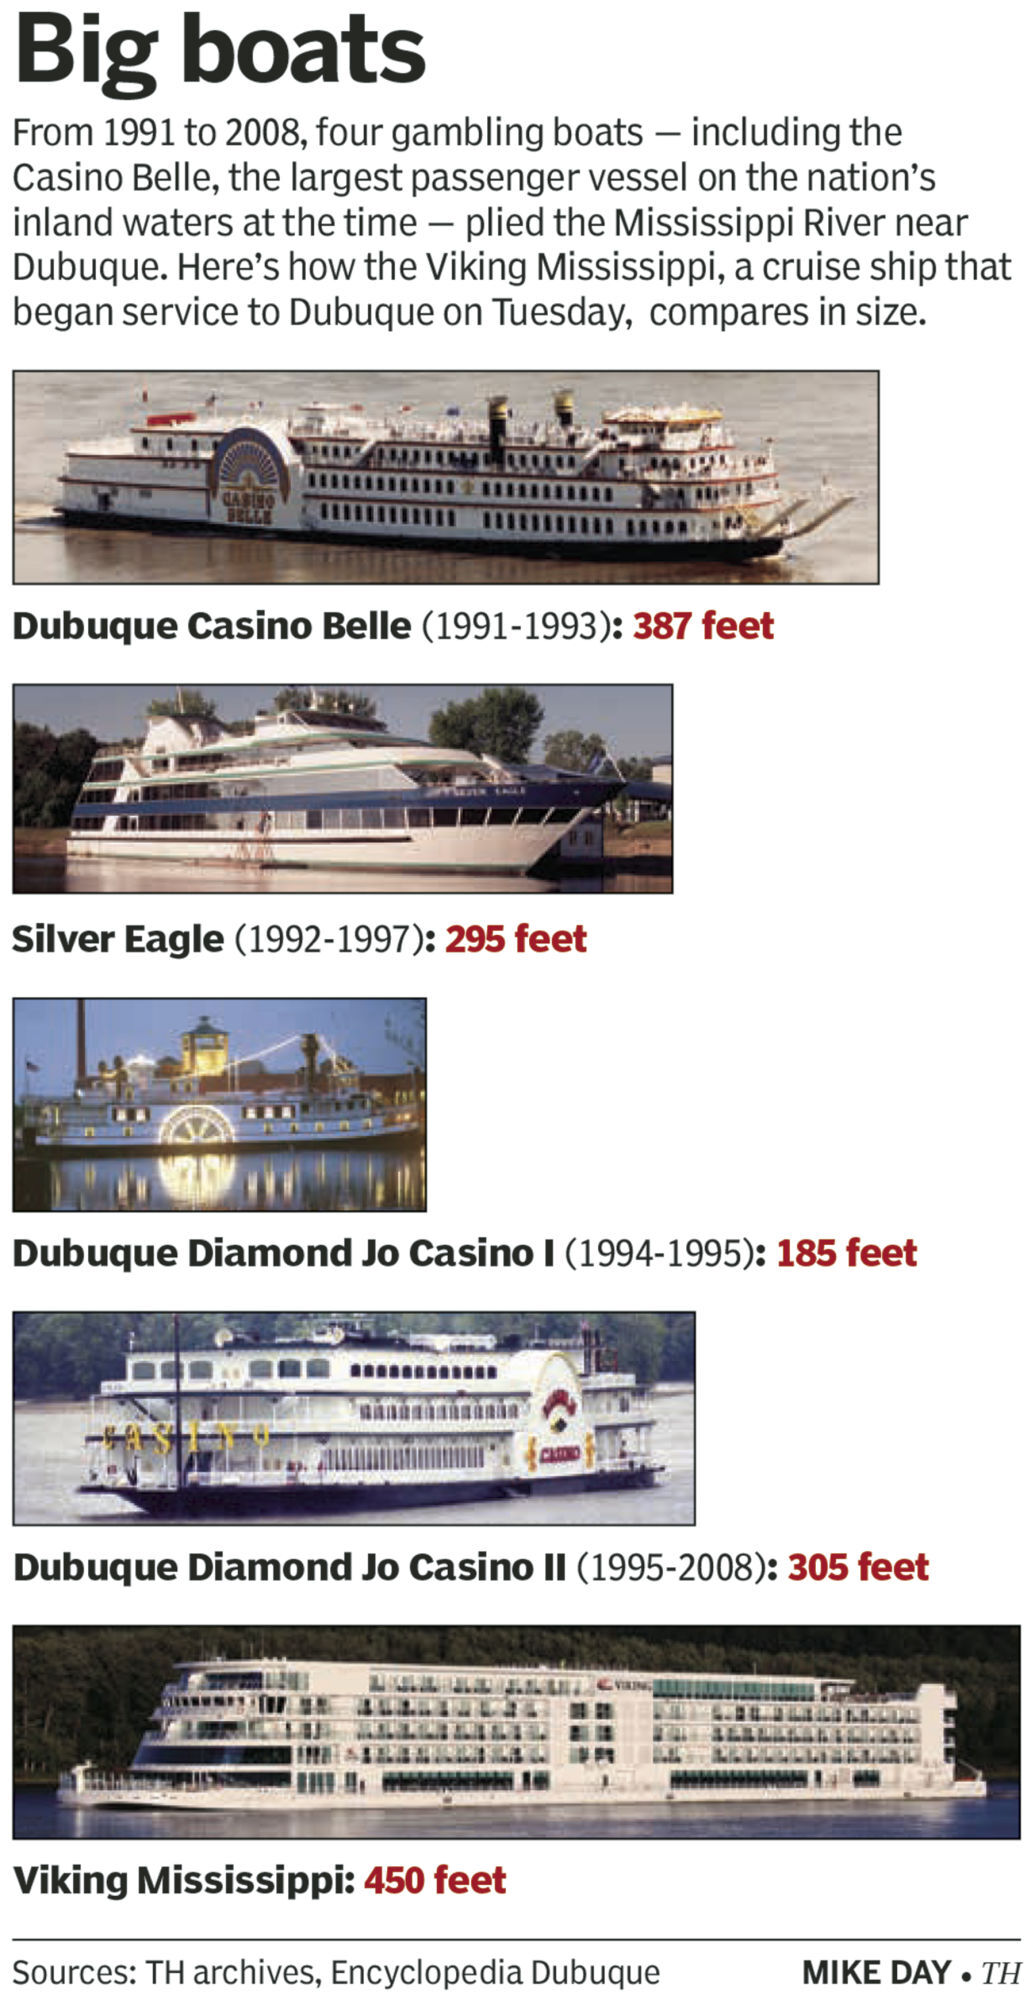 Between 1991 and 2008, four gambling boats — including the Casino Belle, the largest passenger vessel on the nation’s inland waters at the time — plied the Mississippi River near Dubuque. Here’s how the Viking Mississippi, a cruise ship that began service to Dubuque on Tuesday, compares in size.    PHOTO CREDIT: By Mike Day
mike.day@thmedia.com